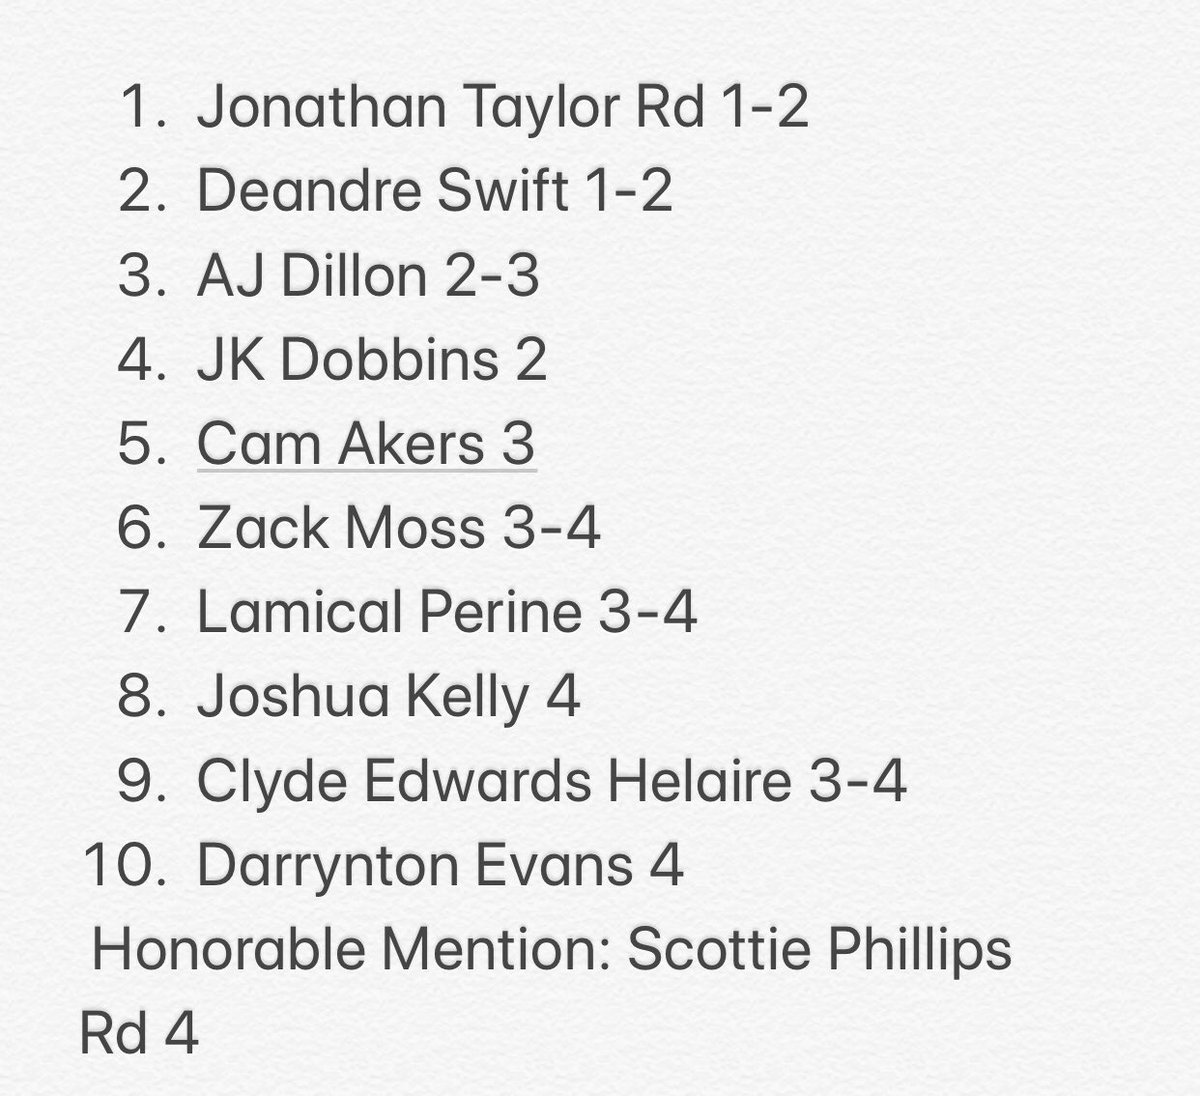 Here’s my top 10 RBs in this draft and round predictions. I would love to debate about this!